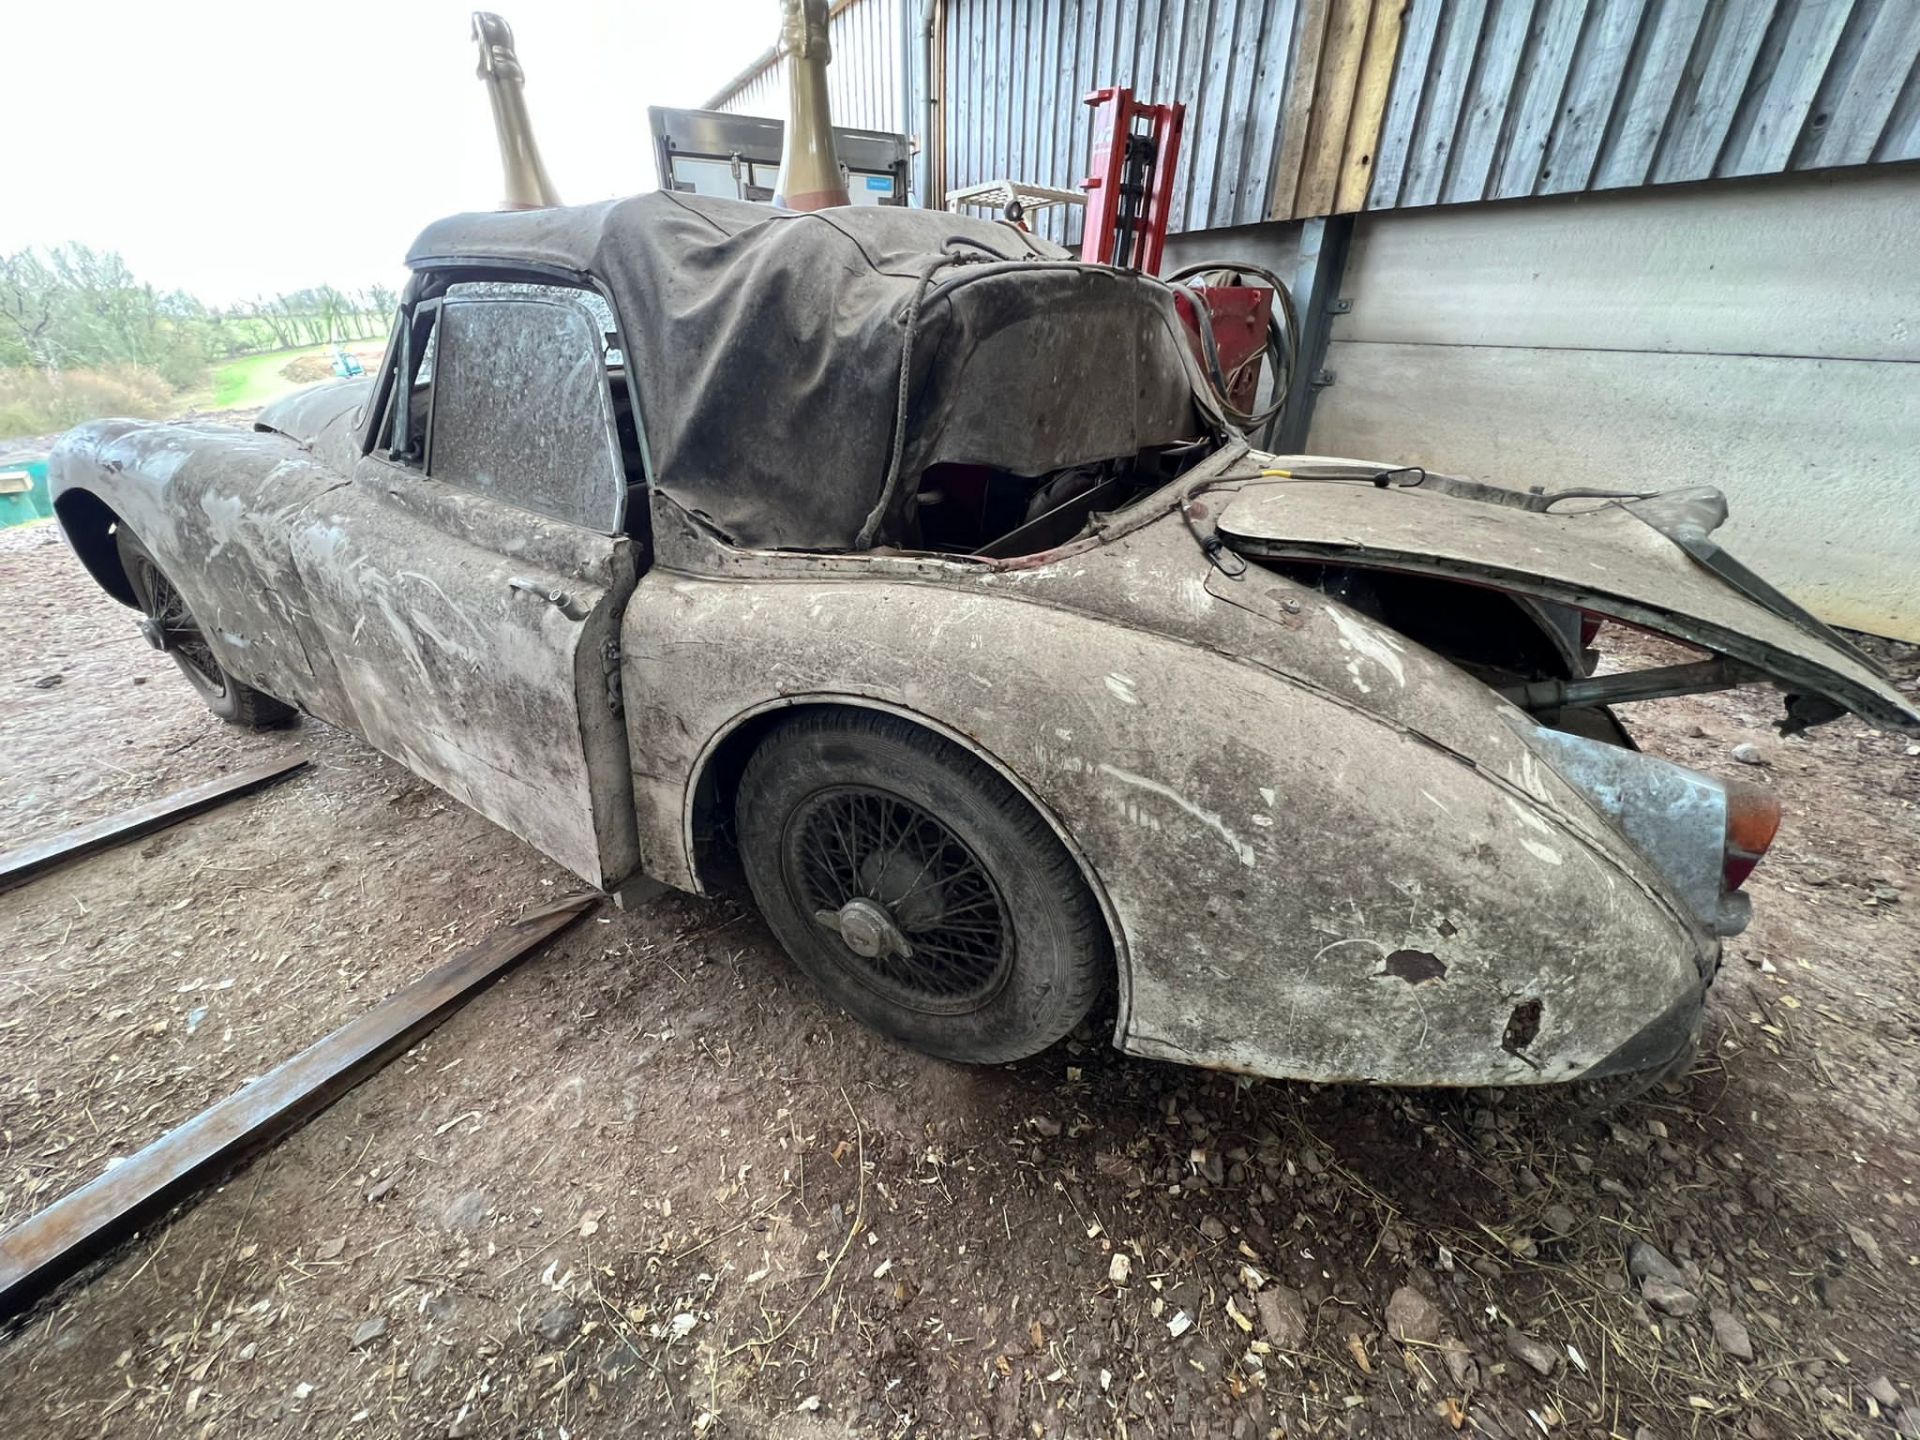 Jaguar XK150 3.4 Drop Head Coupe 1958 Barn Find. Matching numbers. - Image 25 of 27